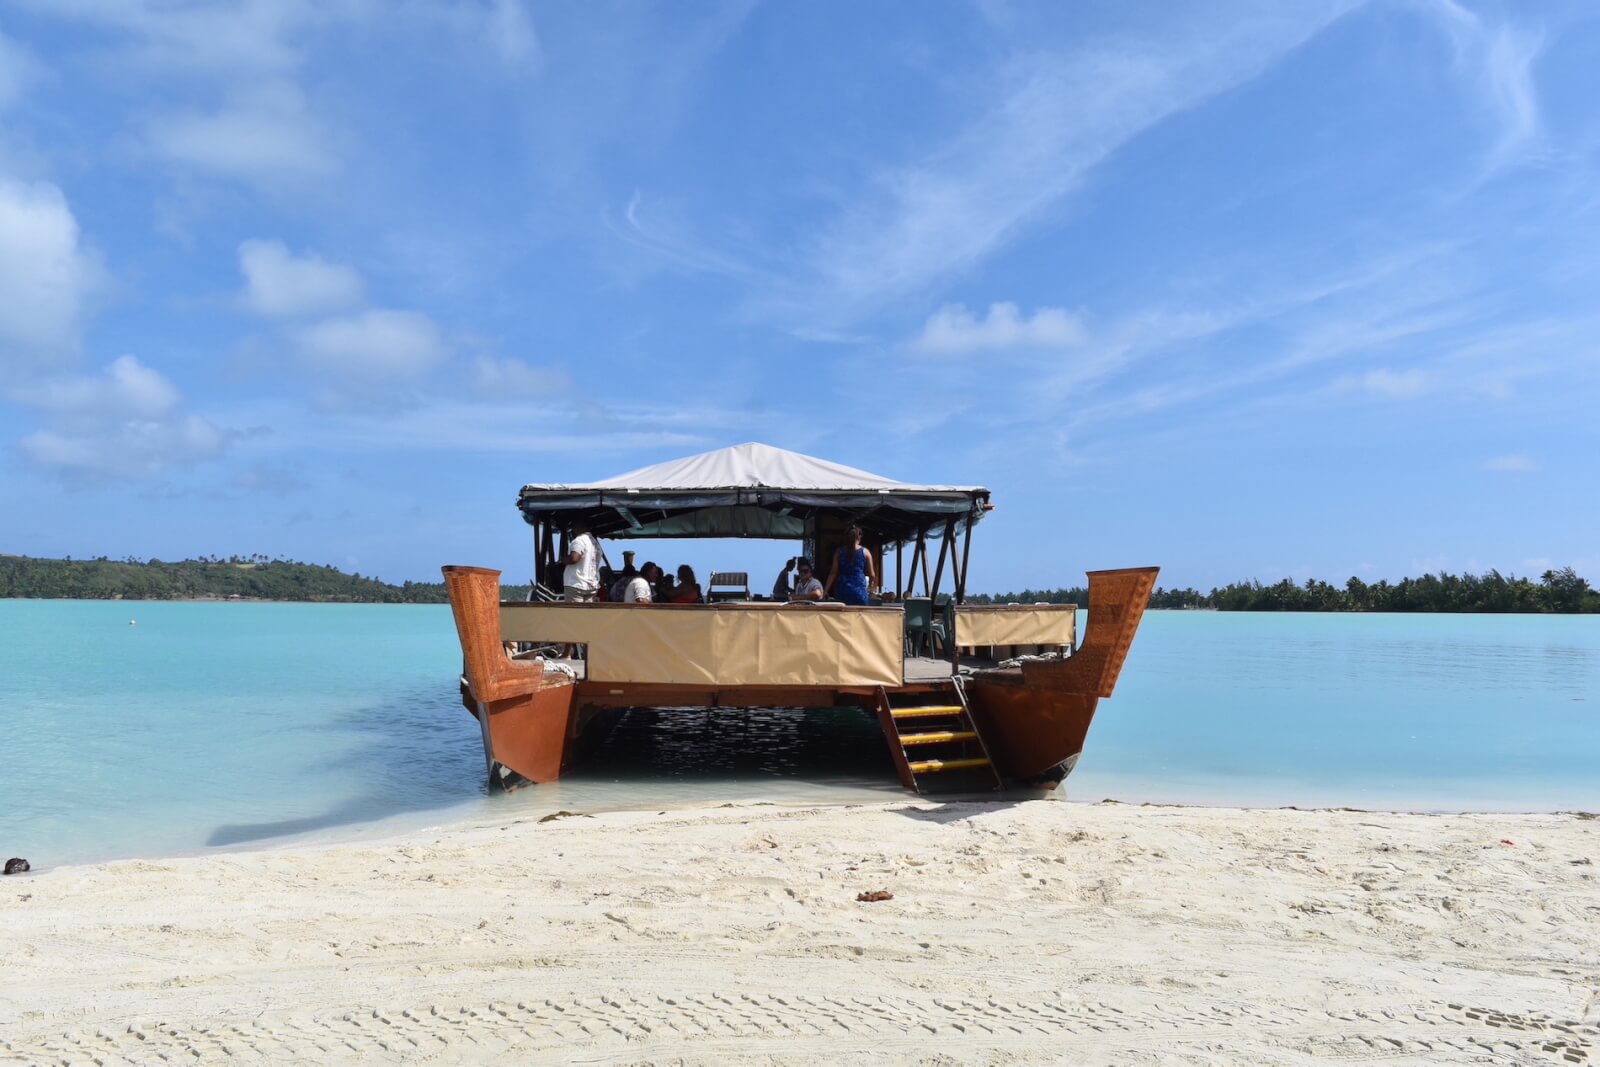 A large outrigger style boat on turquoise water. A must do on a Cook Islands itinerary.